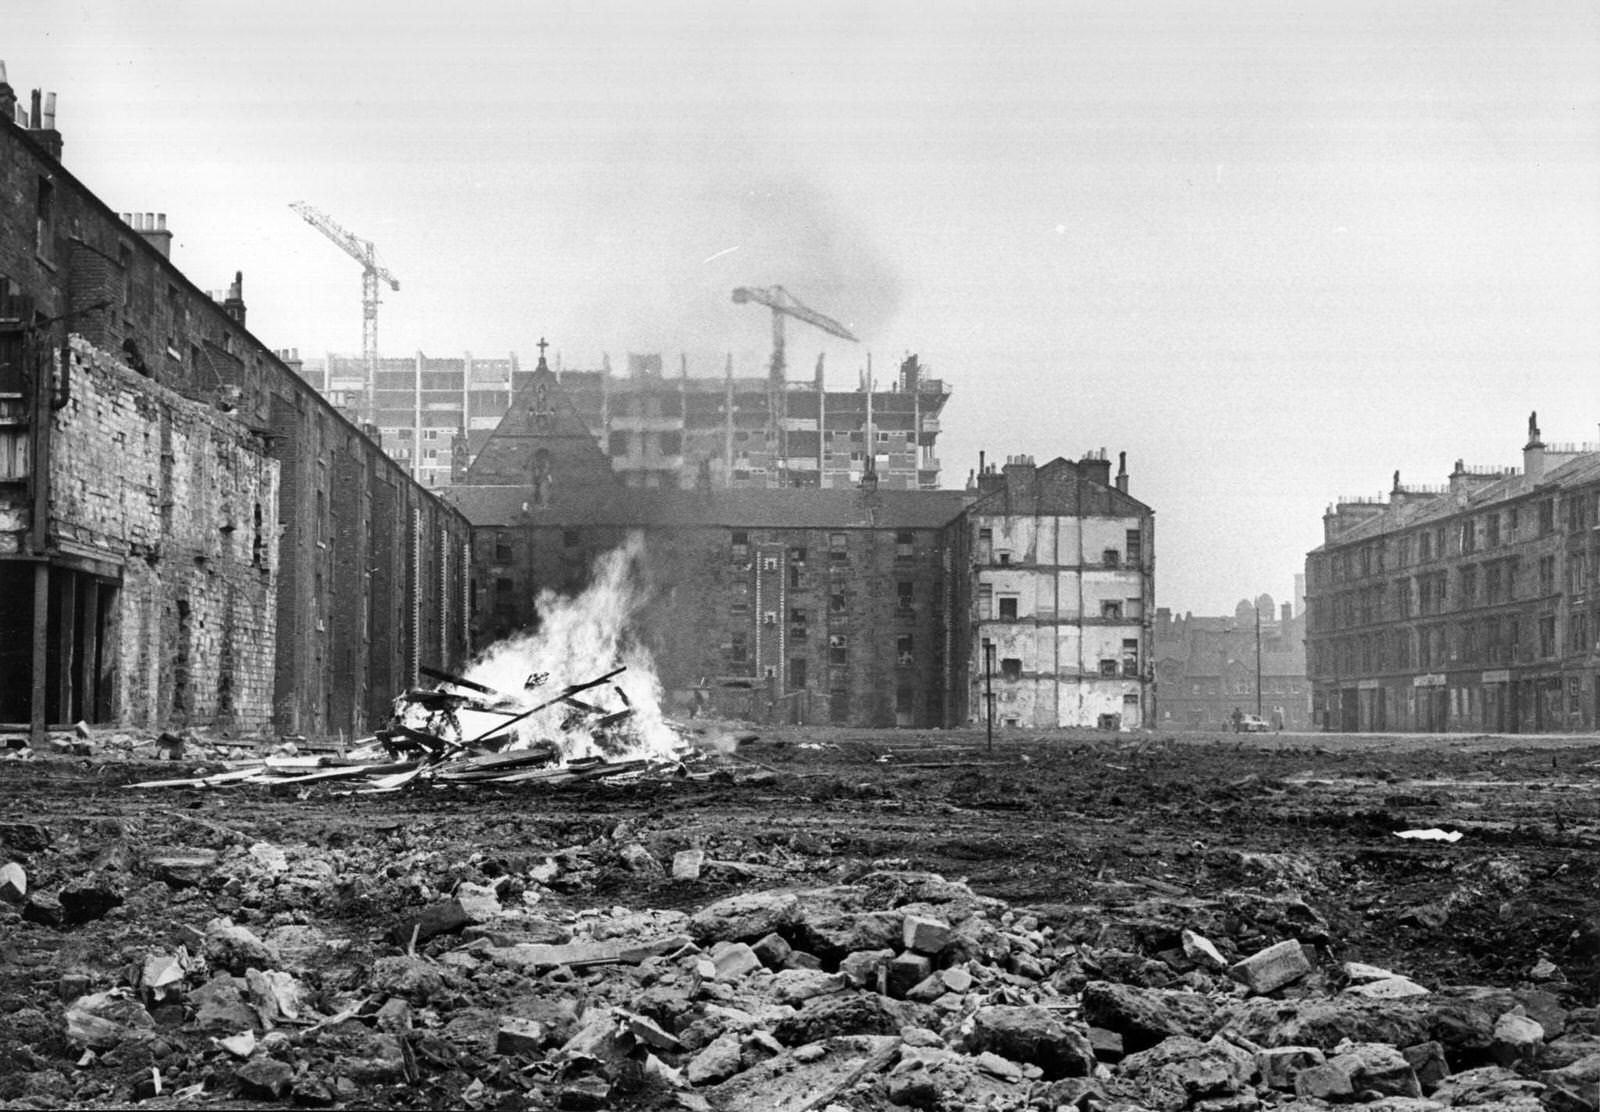 An area of cleared ground in the Gorbals area of Glasgow where debris from the newly-demolished slum tenements is being burnt on a bonfire, 1960